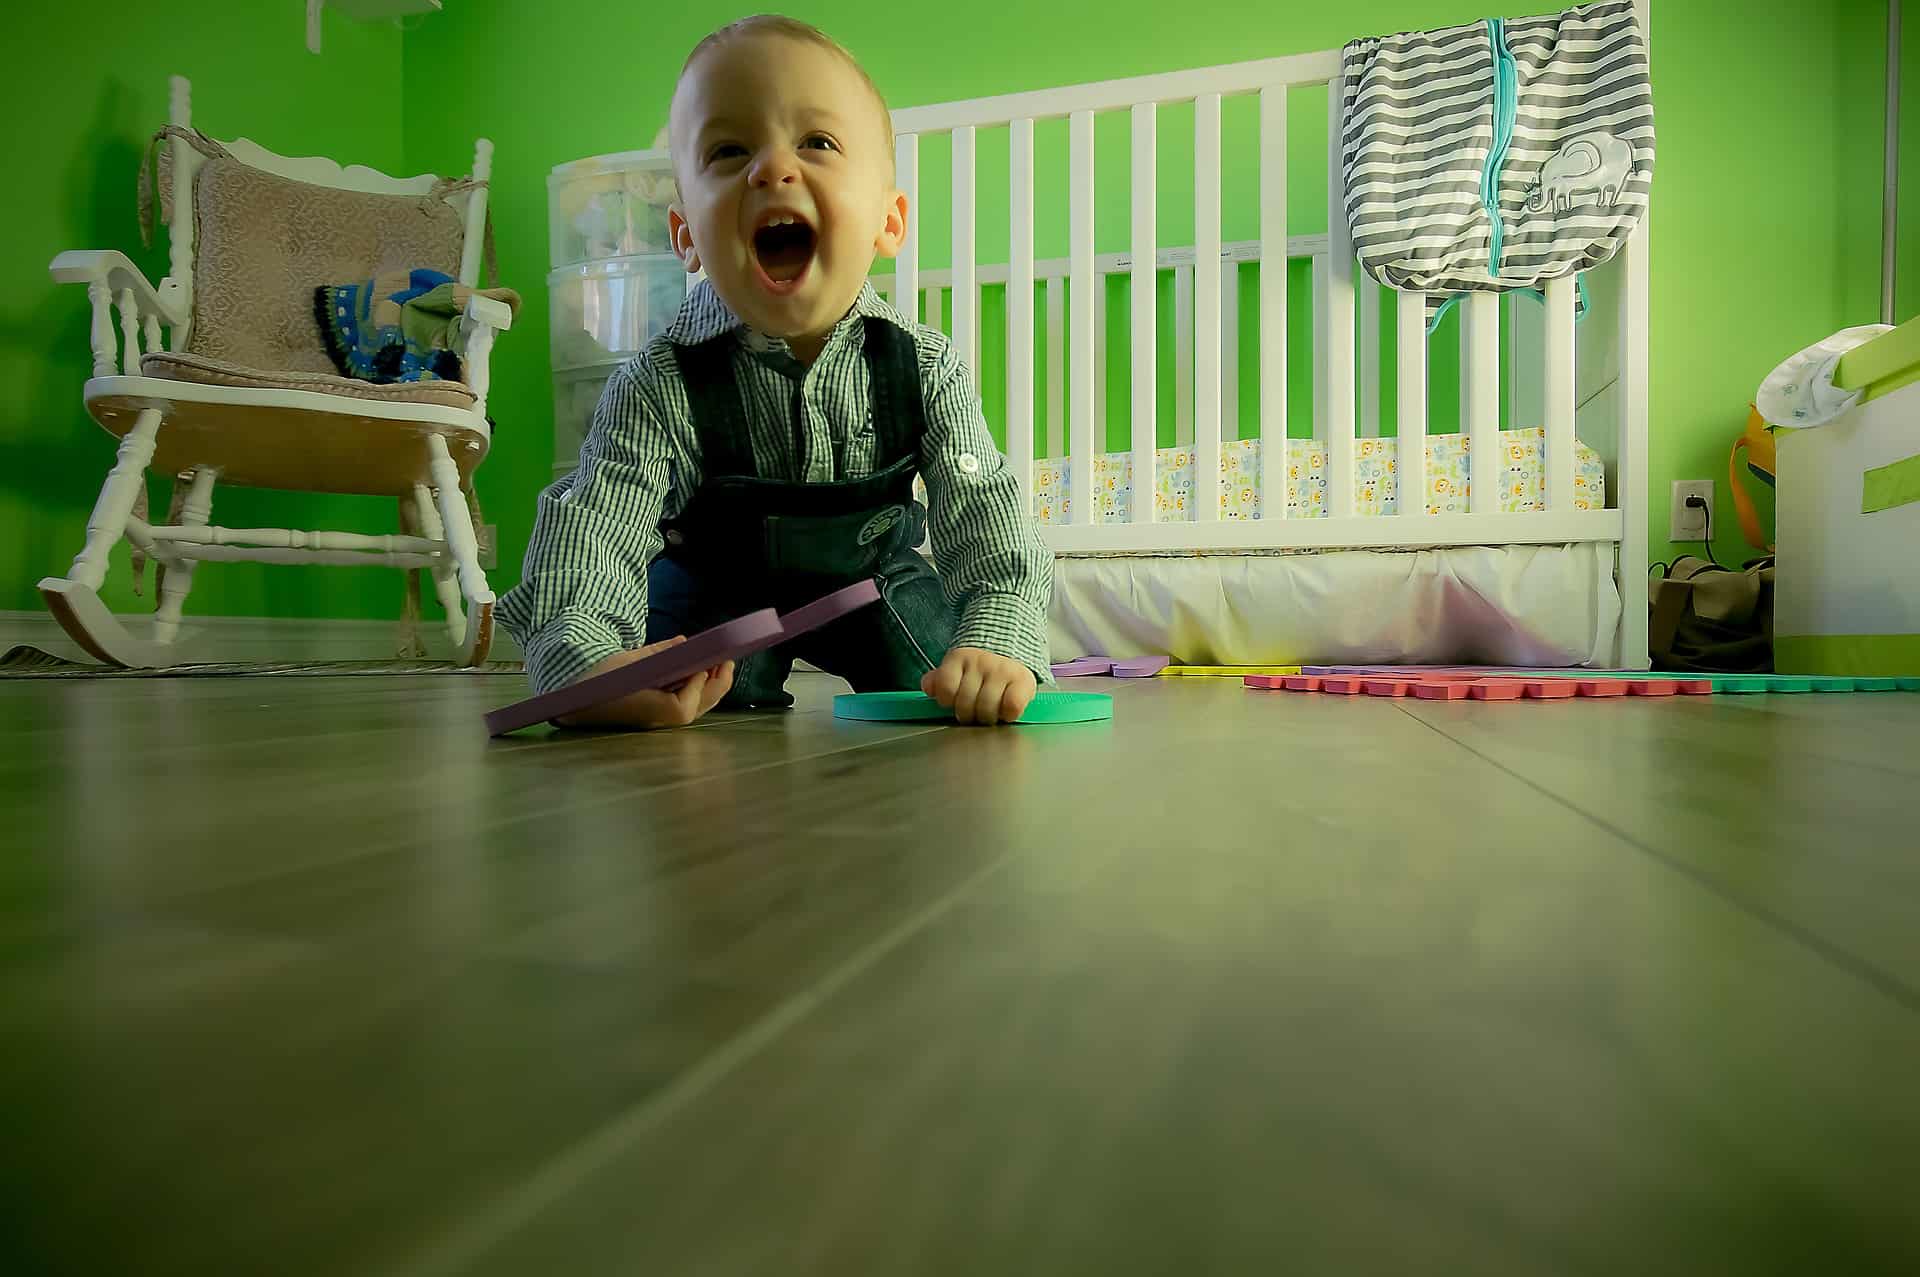 Baby playing on the floor of a nursery